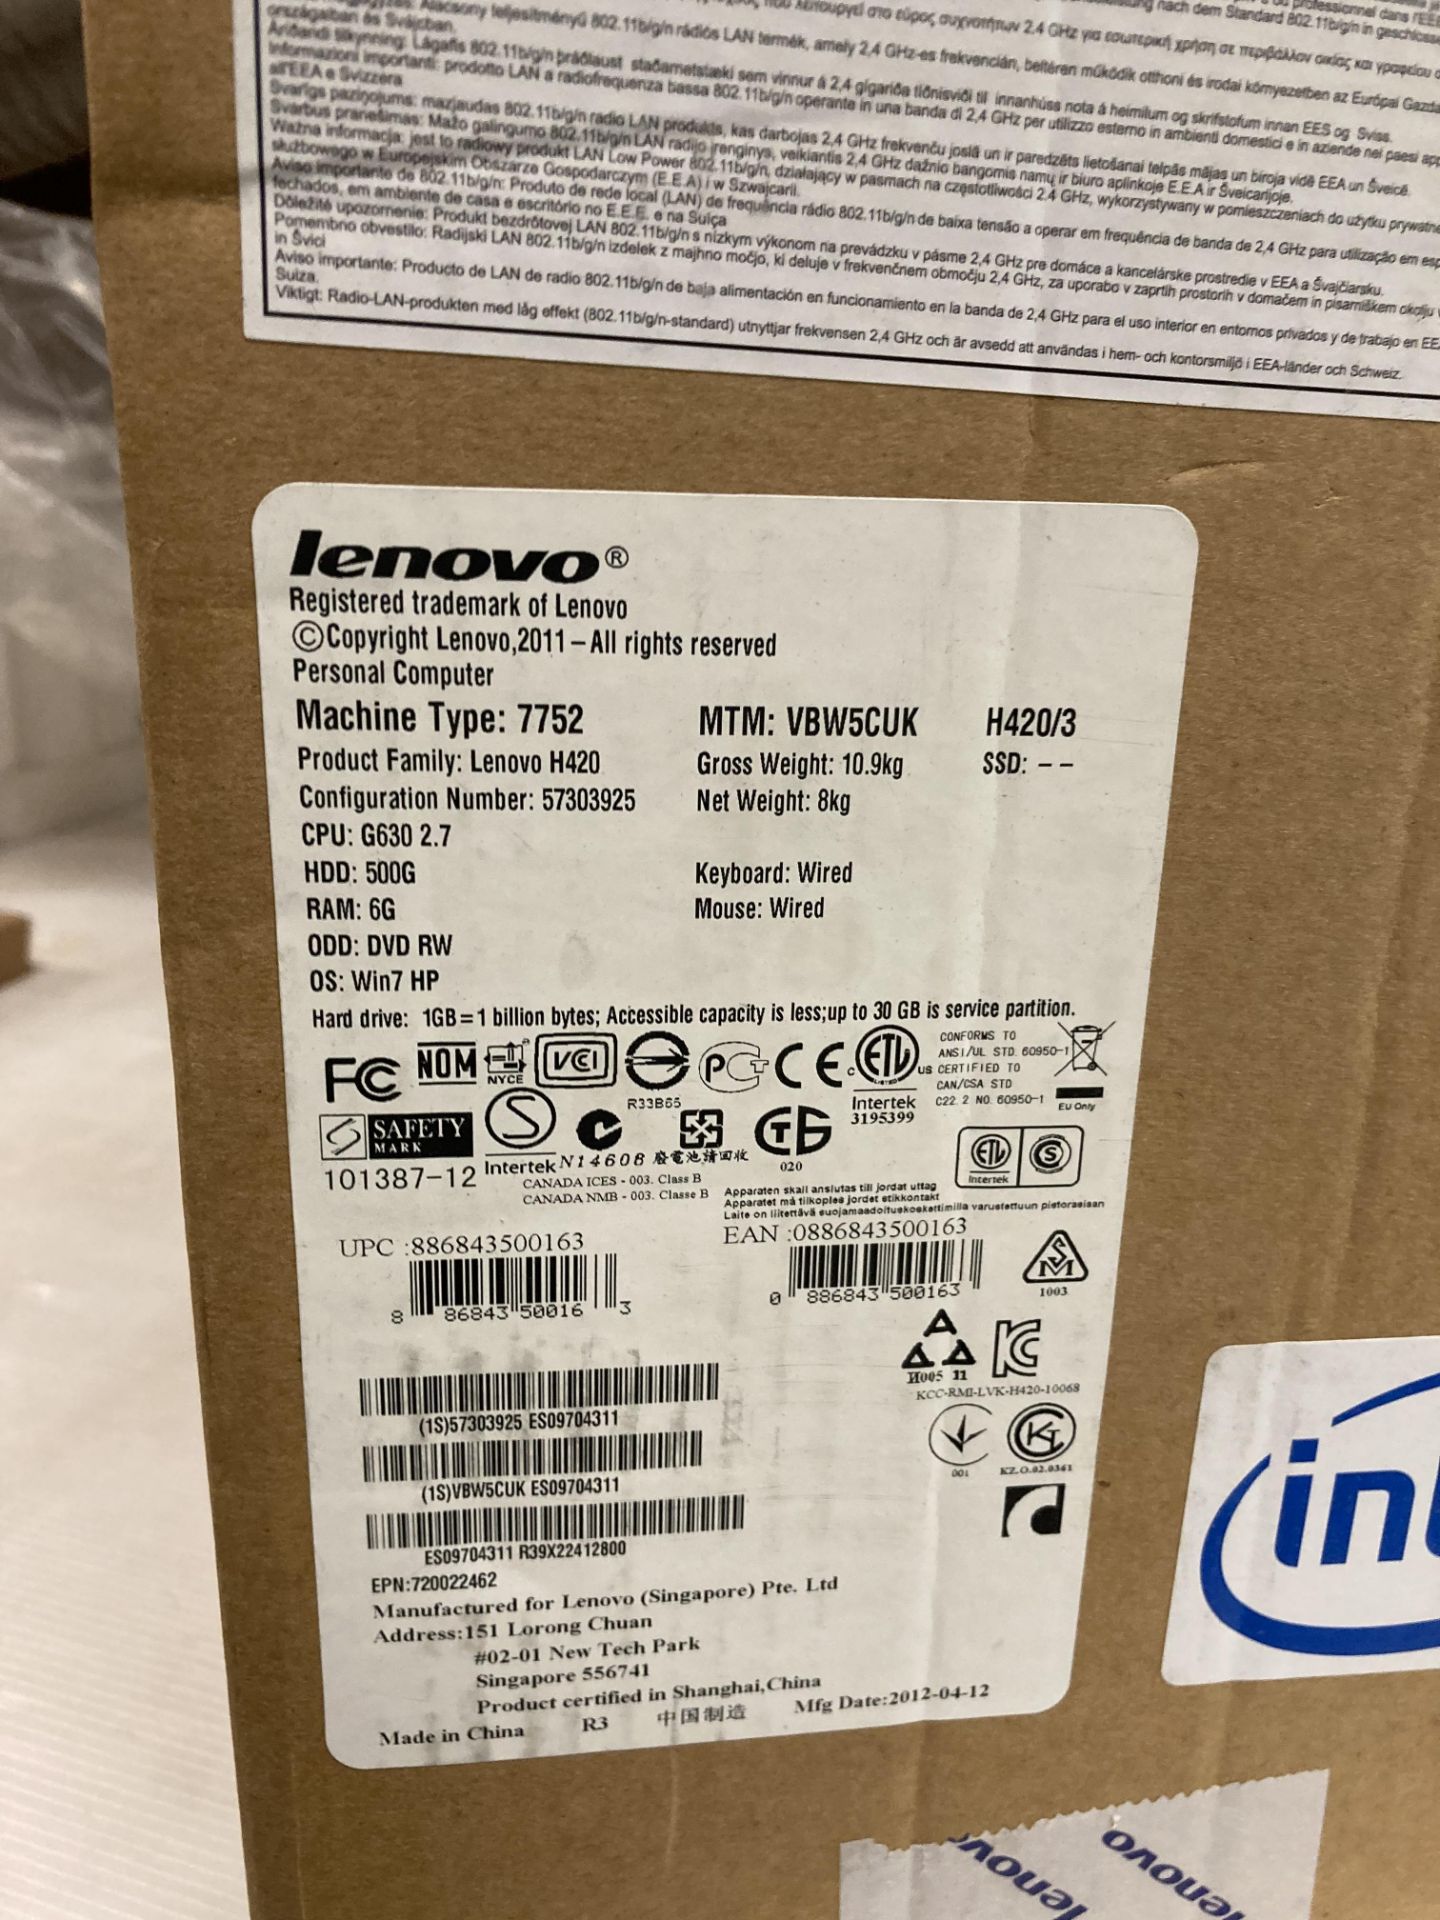 Lenovo 7752 Desktop computer 6GB RAM 500GB HDD complete with power lead, - Image 2 of 2